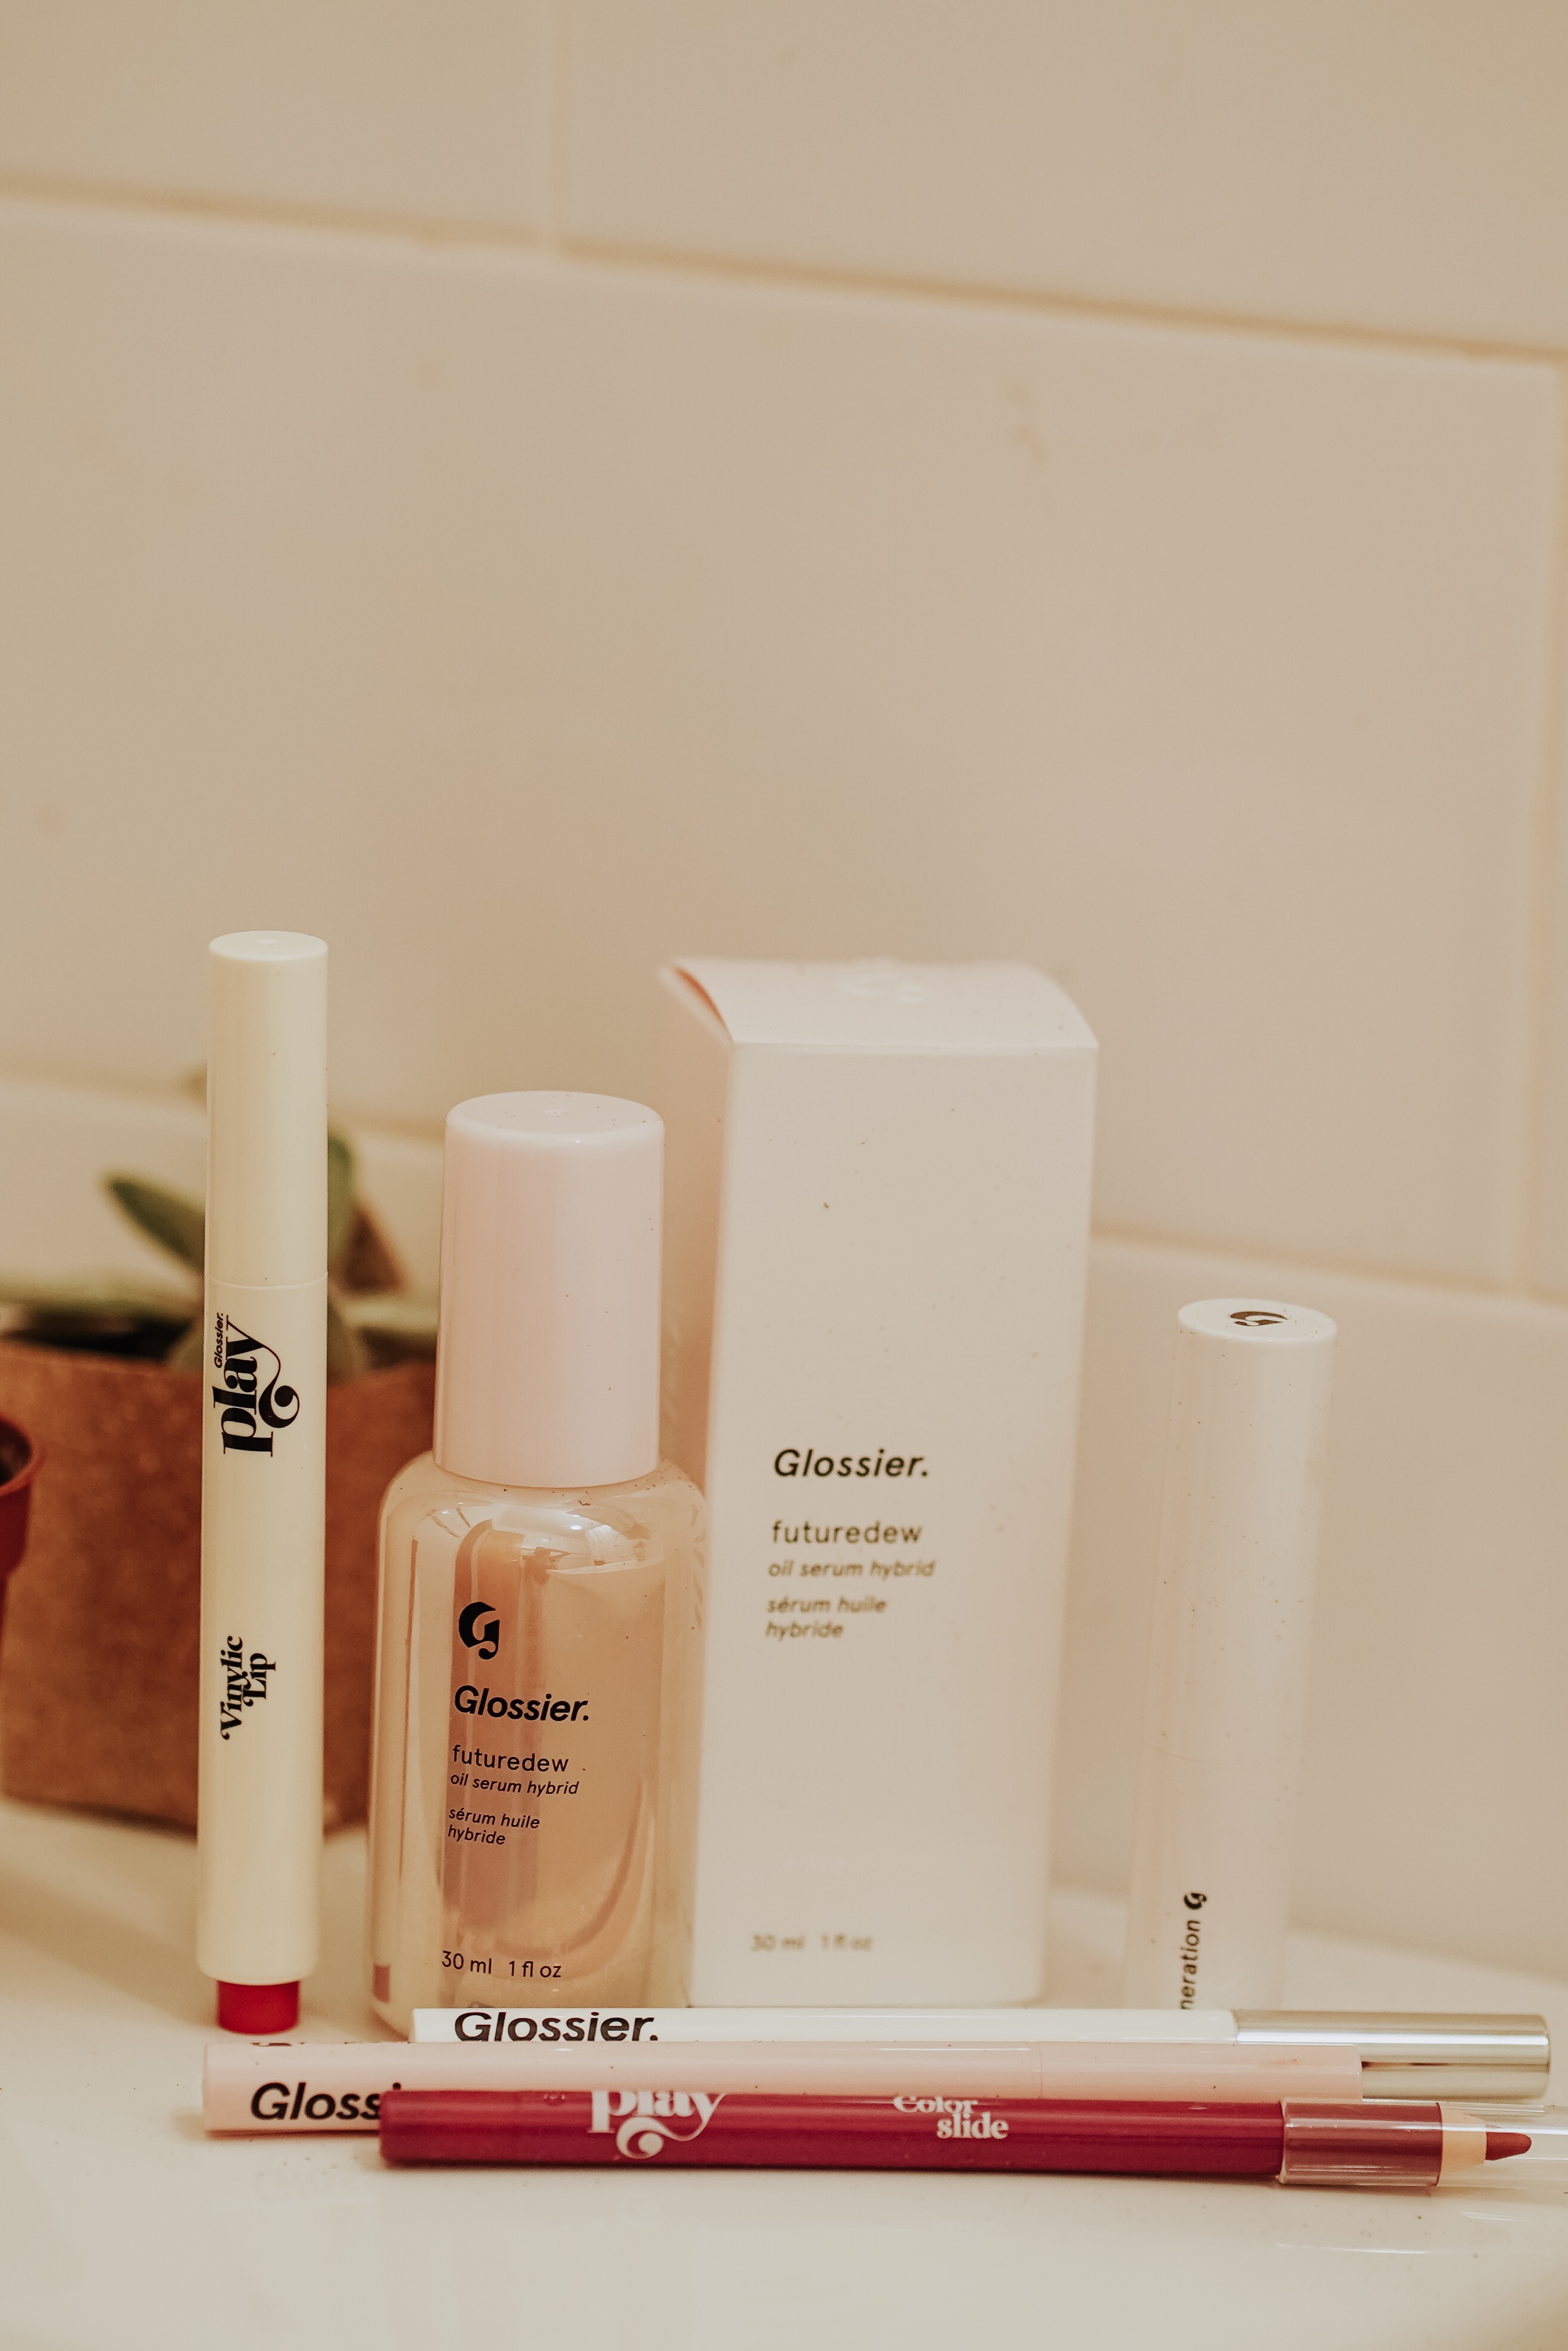 Glossier’s Newest Products.